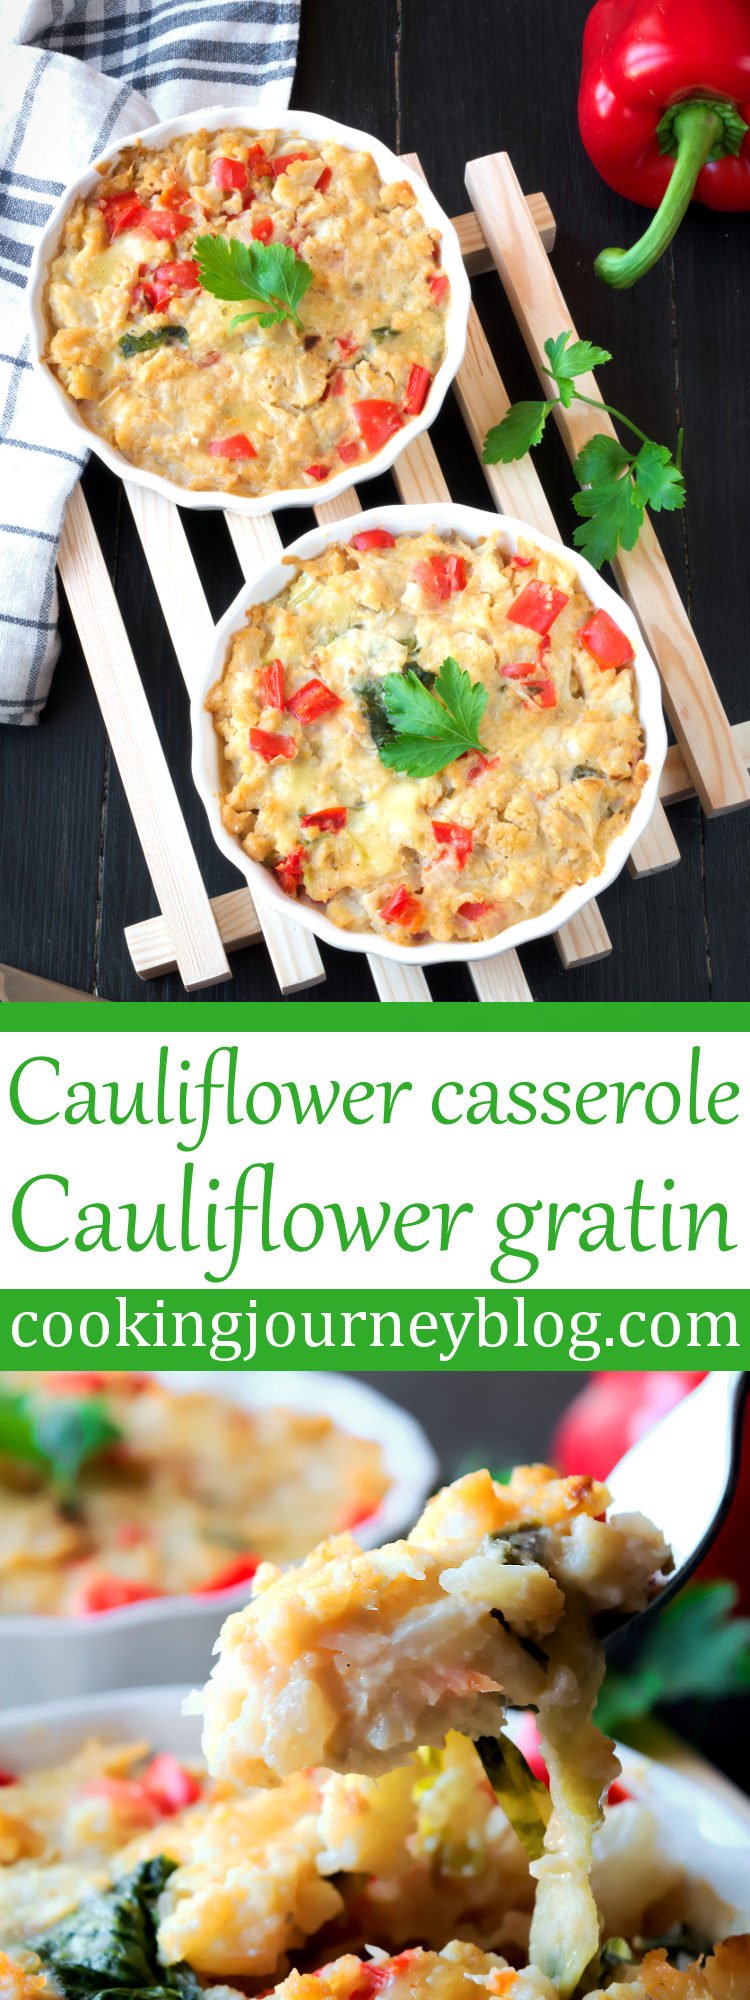 Cauliflower casserole in two individual baking dishes on a wooden rack. Cauliflower casserole or cauliflower gratin (cauliflower and cheese bake) is a great spicy dish for the dinner. It is easy and fast dinner recipe, yet full of flavor. Cauliflower and cheese are best partners, with addition of jalapeno to spice it up! There are so many cauliflower casserole recipes, this is a best side dish or a snack during cold winter months to enjoy.